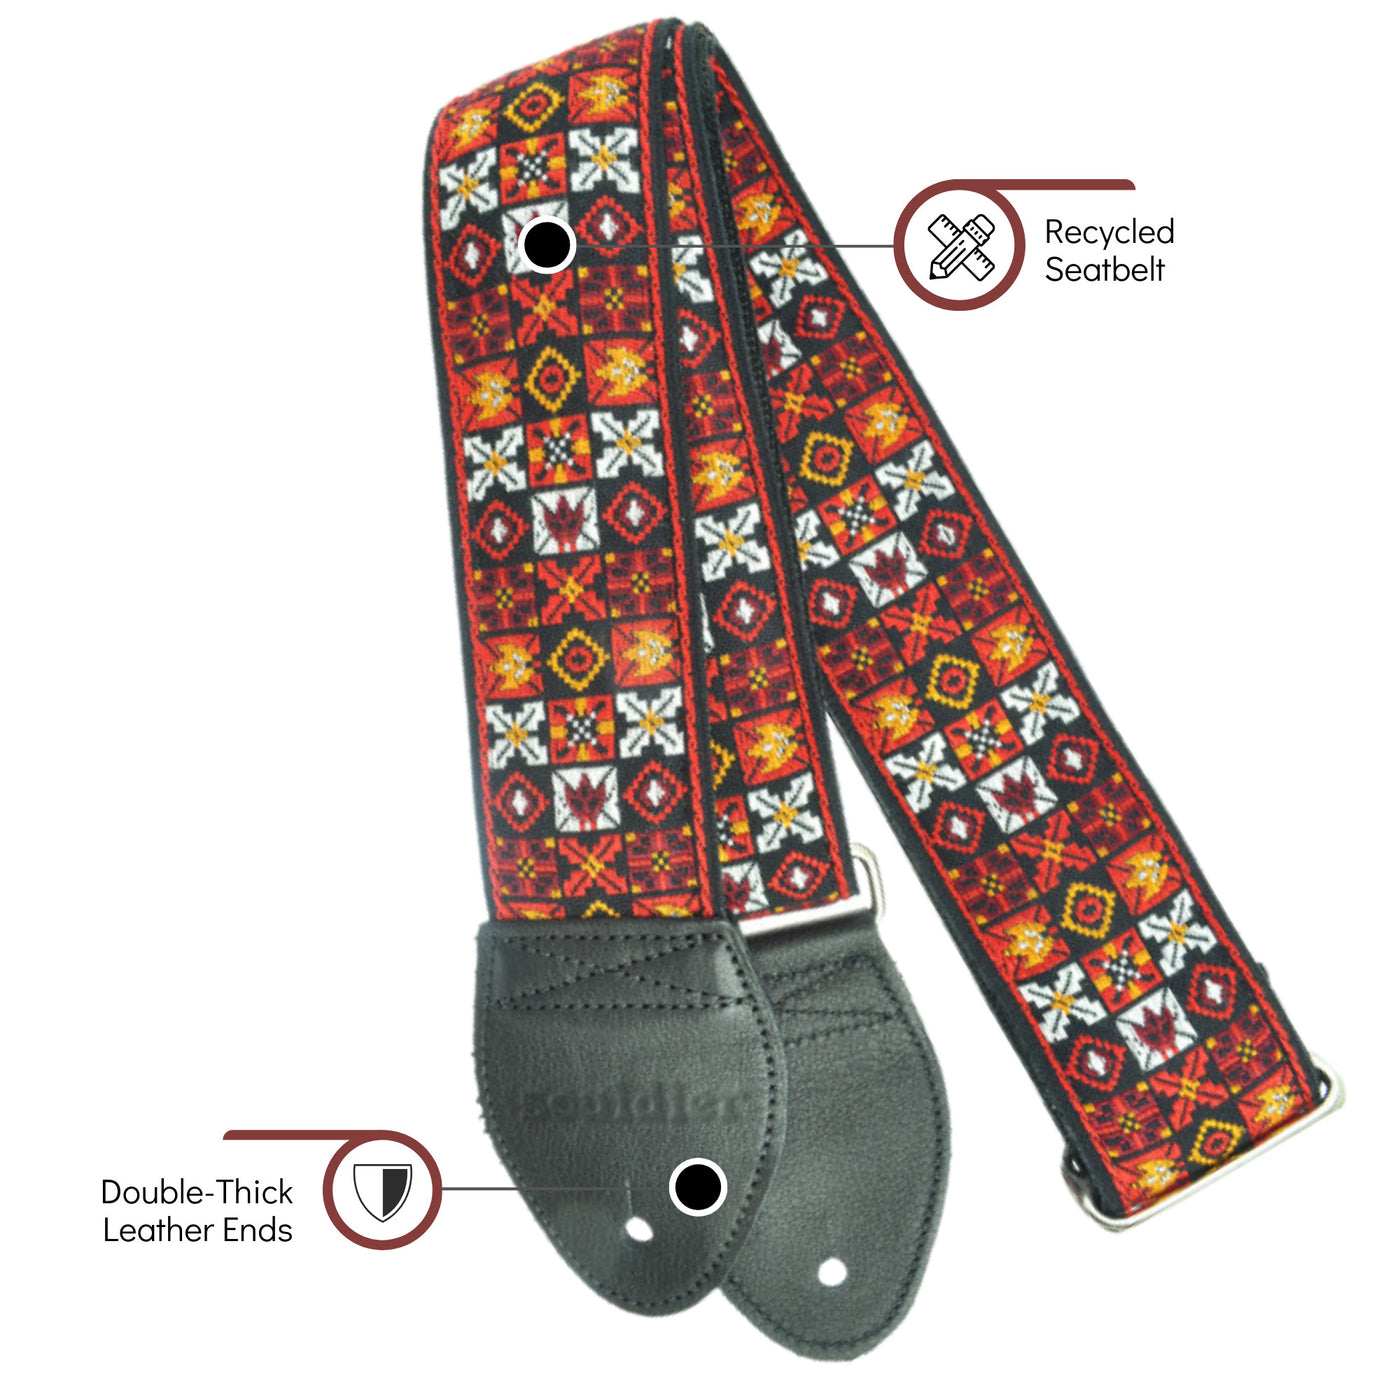 Souldier GS0295BK02BK - Handmade Seatbelt Guitar Strap for Bass, Electric or Acoustic Guitar, 2 Inches Wide and Adjustable Length from 30" to 63"  Made in the USA, Woodstock, Red